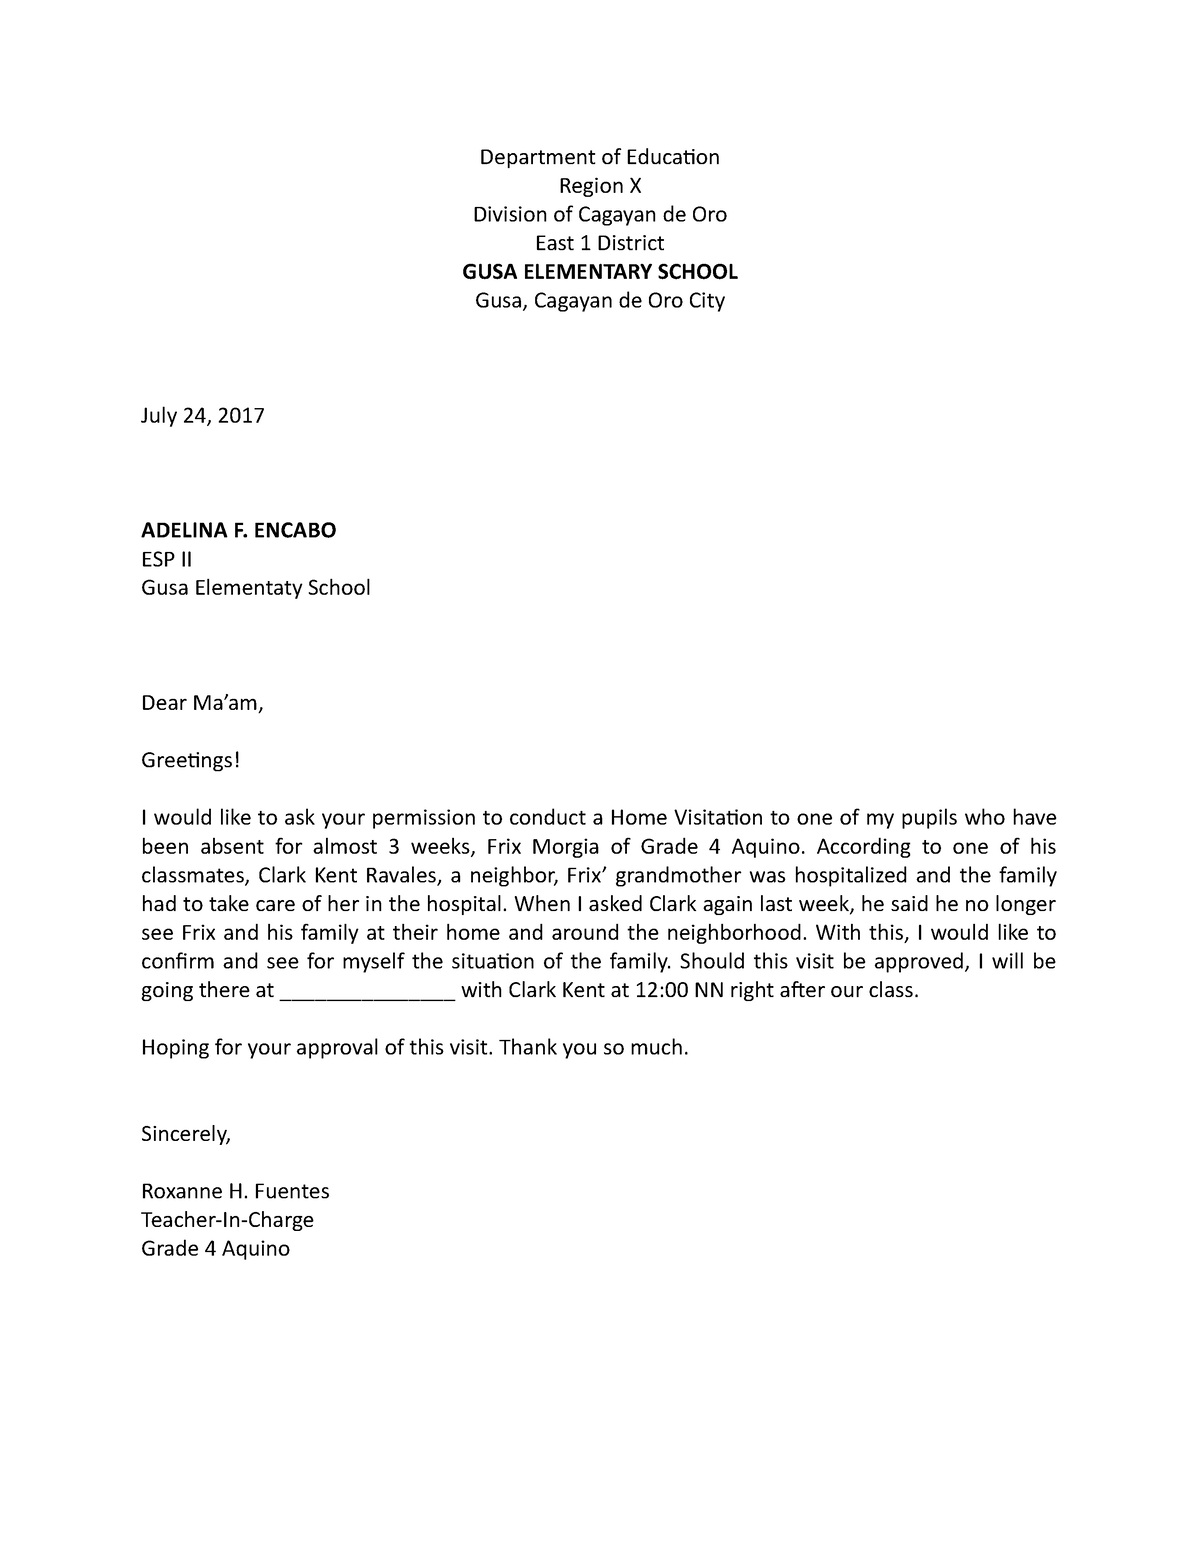 Home Visitation Letter to Principal - Department of Education Region X ...